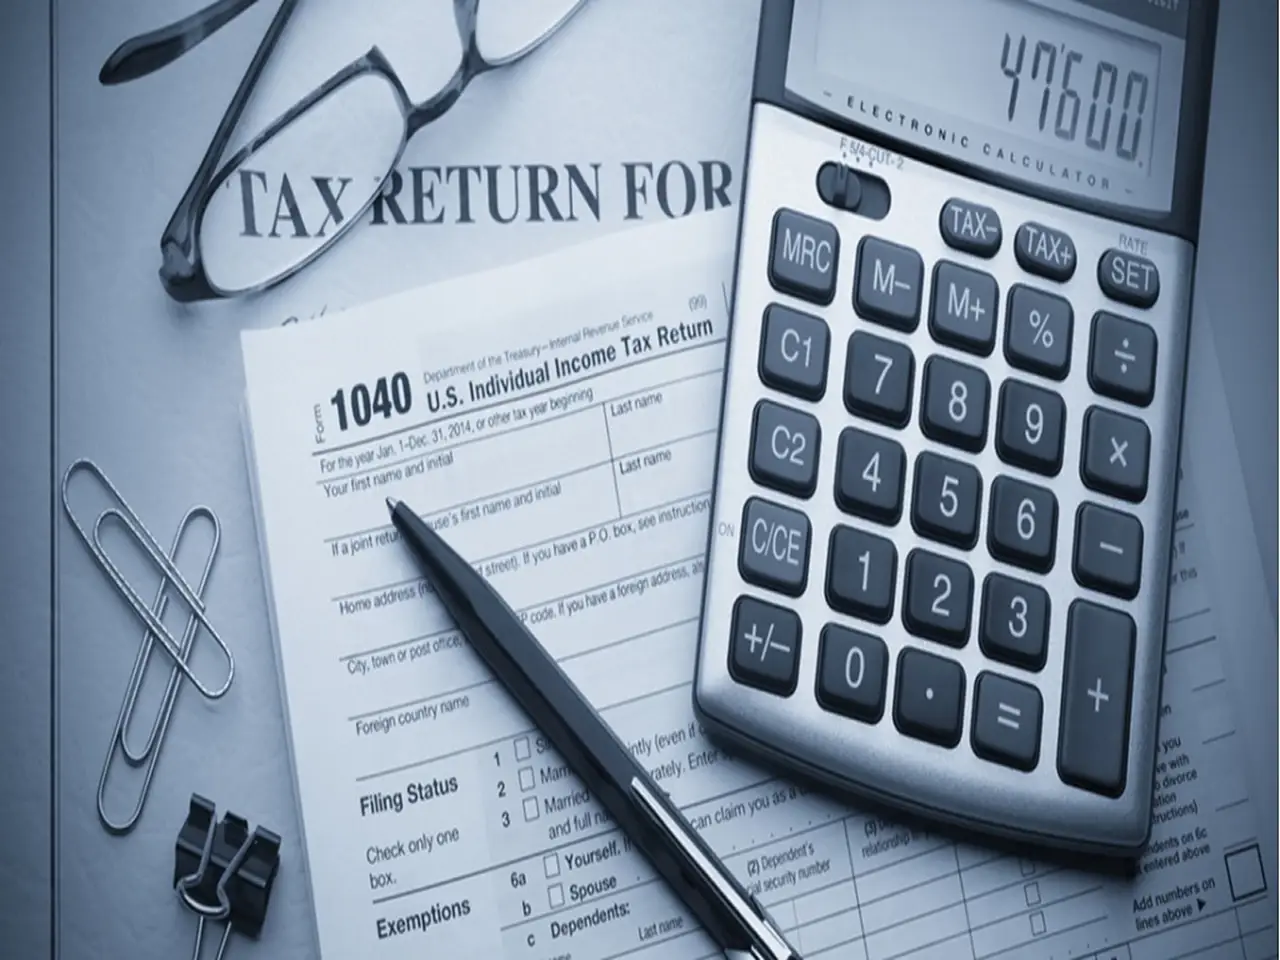 Every responsible citizen of the country needs to learn what an income tax return is, how to file an income tax return